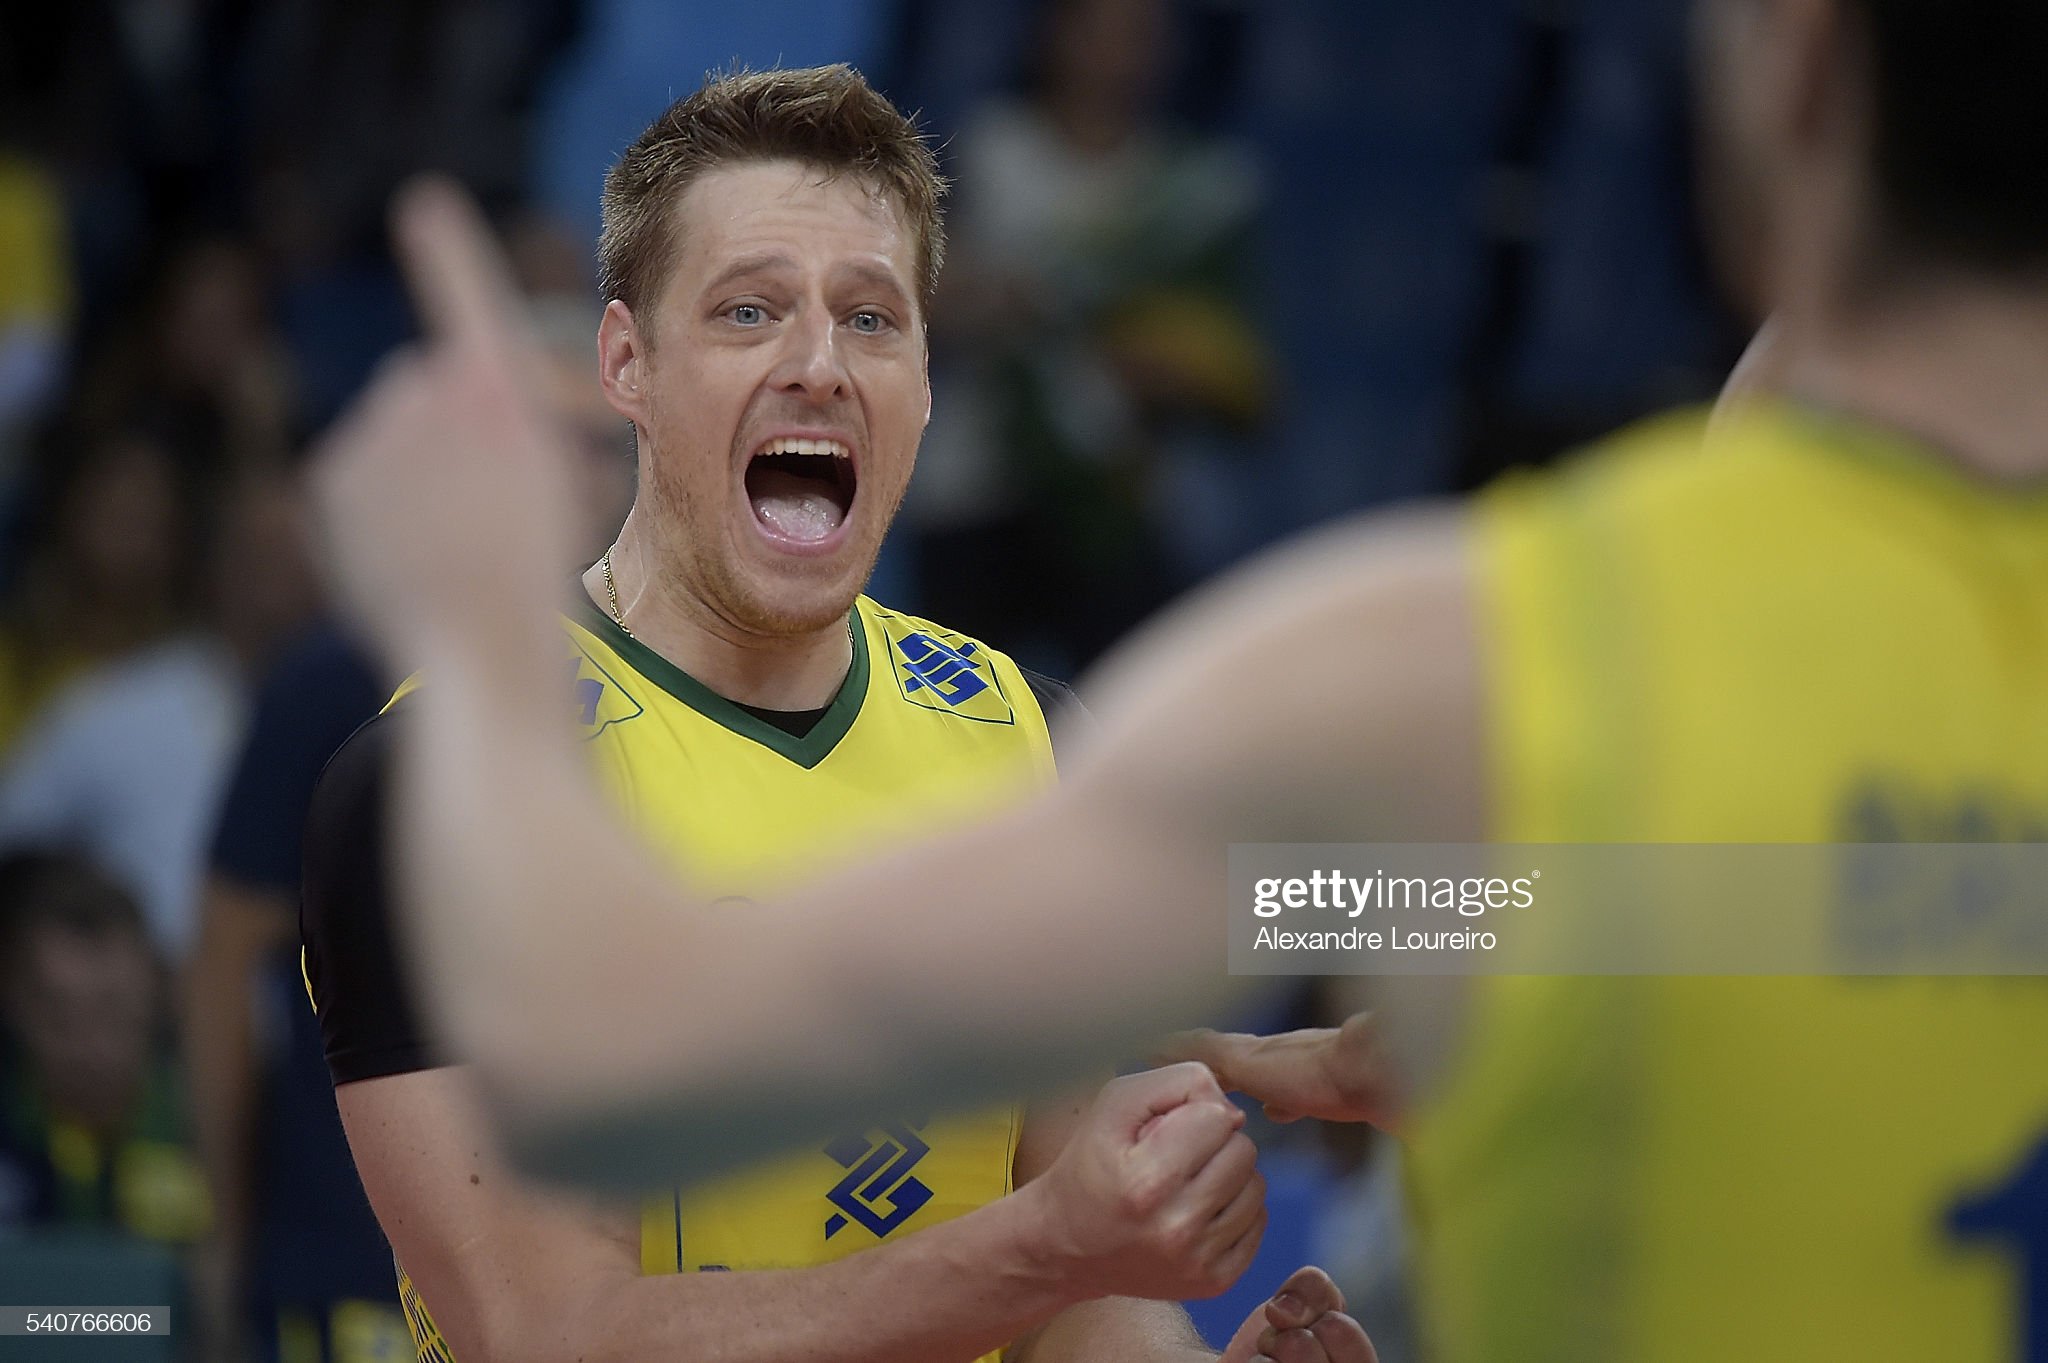 RIO DE JANEIRO, BRAZIL - JUNE 16: Murilo Endres #8 of Brazil celebrates a point during the match between Brazil and Iran on the FIVB World League 2016 - Day 1 at Carioca Arena 1 on June 16, 2016 in Rio de Janeiro, Brazil. (Photo by Alexandre Loureiro/Getty Images)